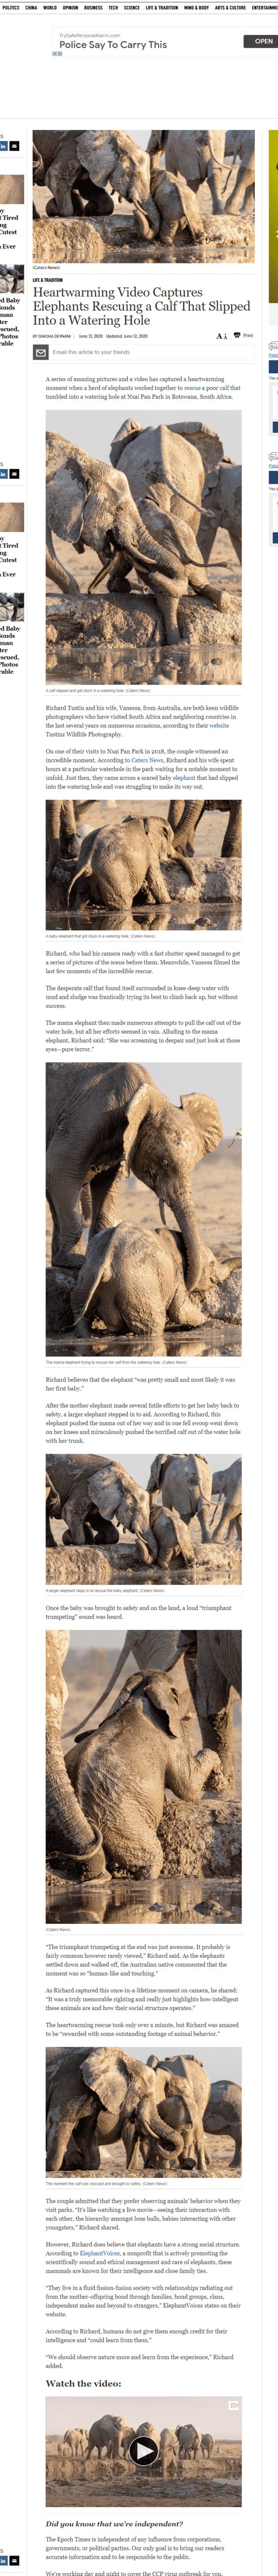 Epoch News, Elephant Save at water hole